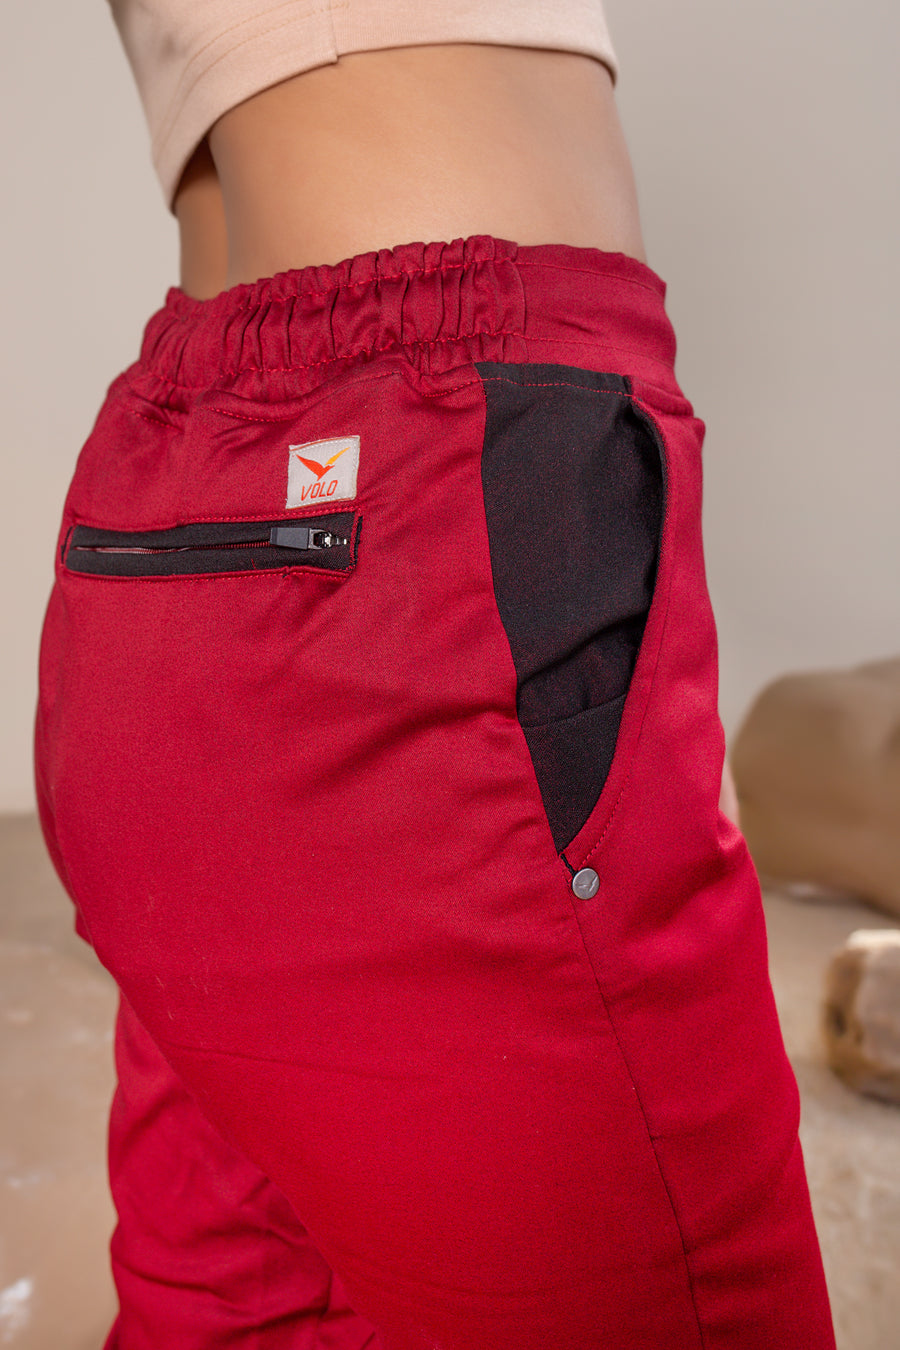 Women's Terra Joggers Jasper Red | VOLO Apparel | Designed for you to rock climb, hike, yoga, run or just chill. The most versatile athletic joggers that are fitted for your every daily life and all your athletic endeavors. The Earth Joggers comes with five pockets, features a 3 point gusset, 2 zipper pockets, snap buttons, and a breathable stretchy spandex cotton twill. With an internal drawstring and a tailored fit, these are gonna be your go to adventure joggers.